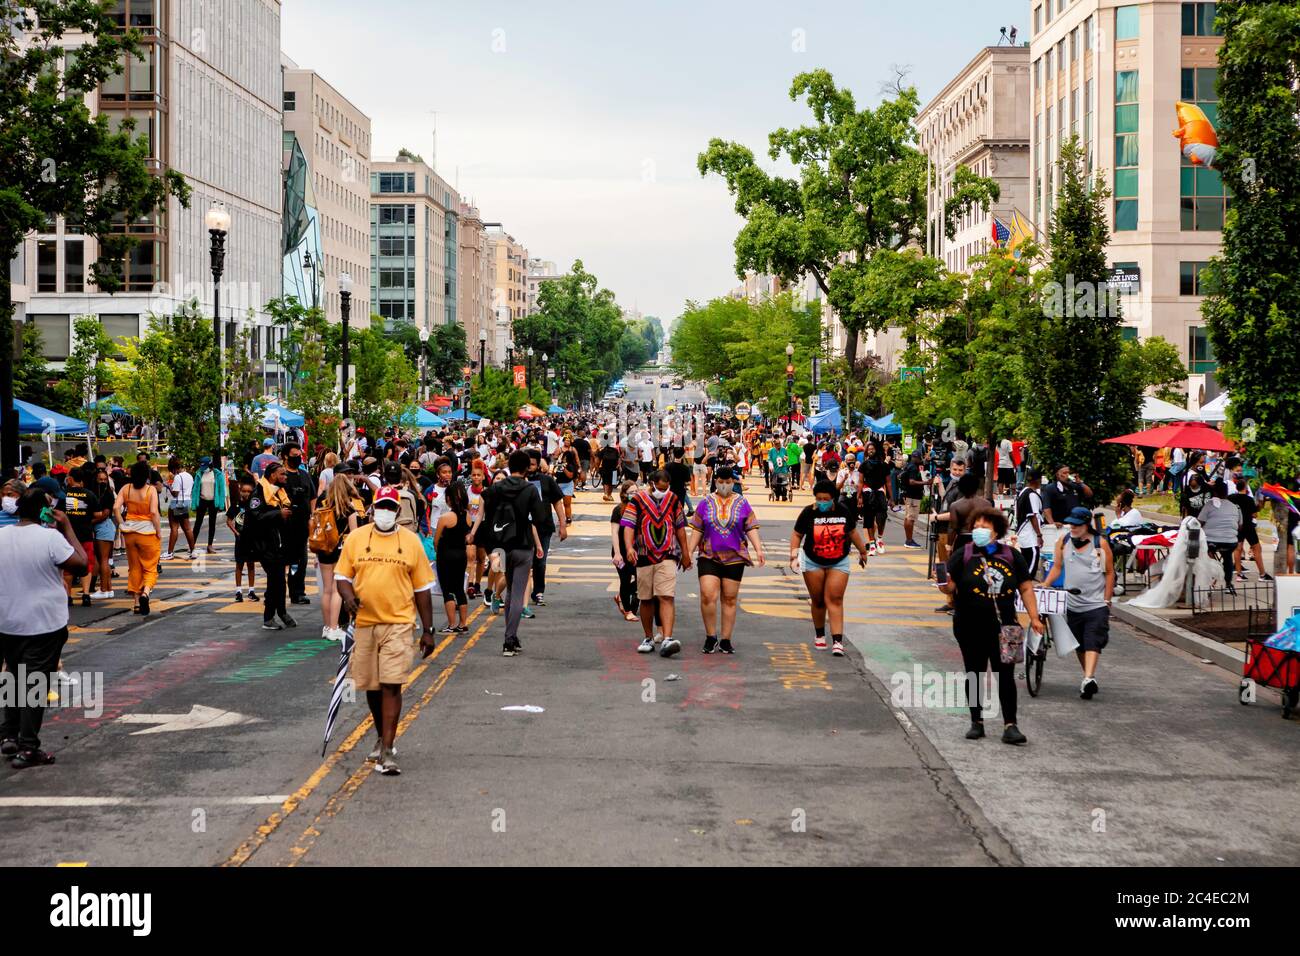 Hundreds of people protest police brutality and celebrate Juneteenth at Black Lives Matter Plaza / Lafayette Square, Washington, DC, United States Stock Photo